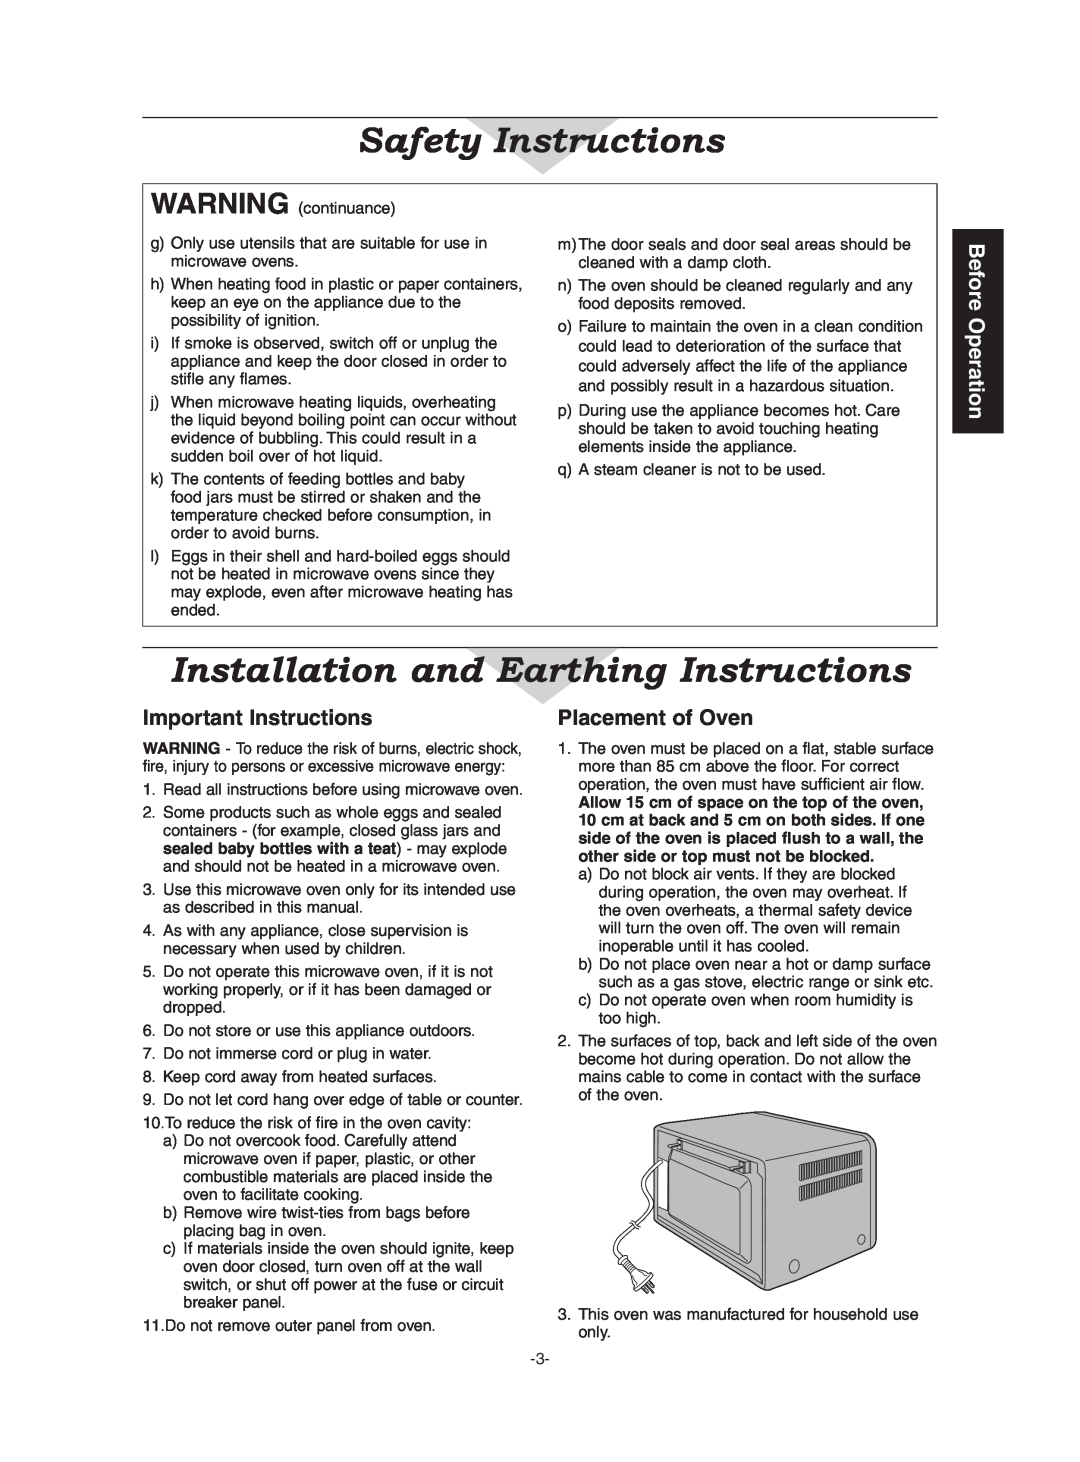 Panasonic NN-CD997S Installation and Earthing Instructions, Important Instructions, Placement of Oven, Safety Instructions 